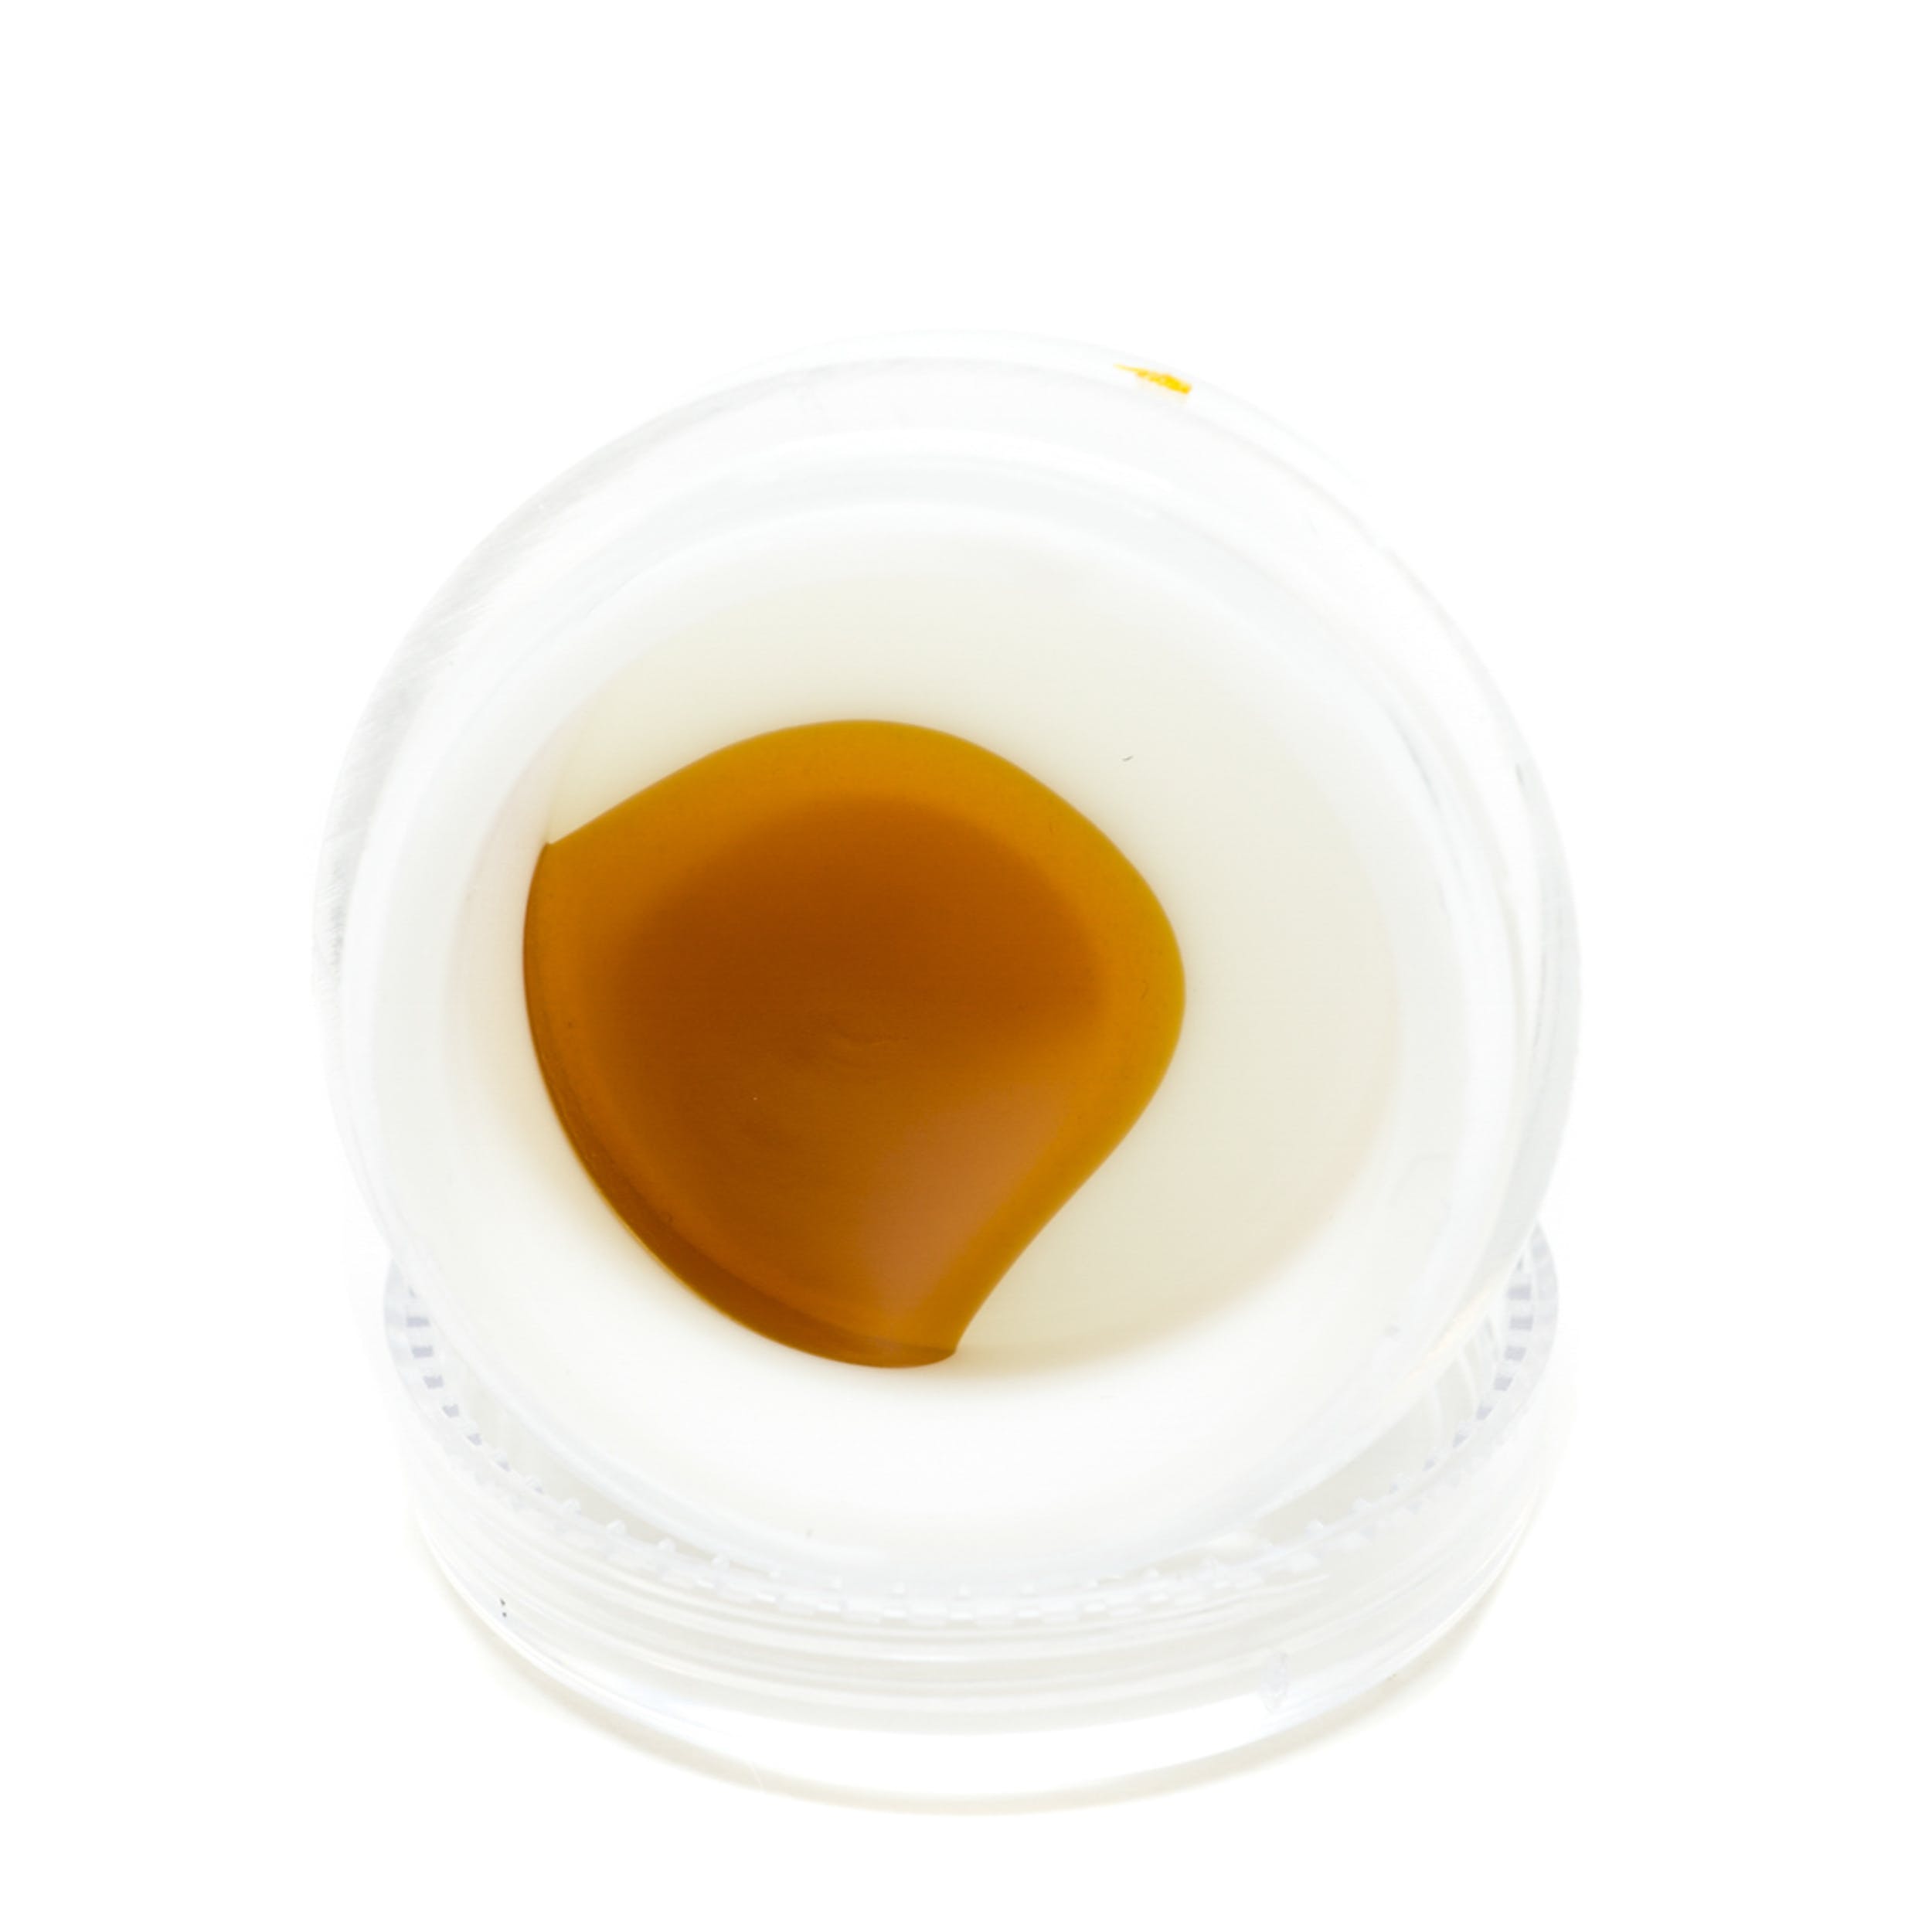 concentrate-odo-co2-extracts-odo-high-profile-co2-oil